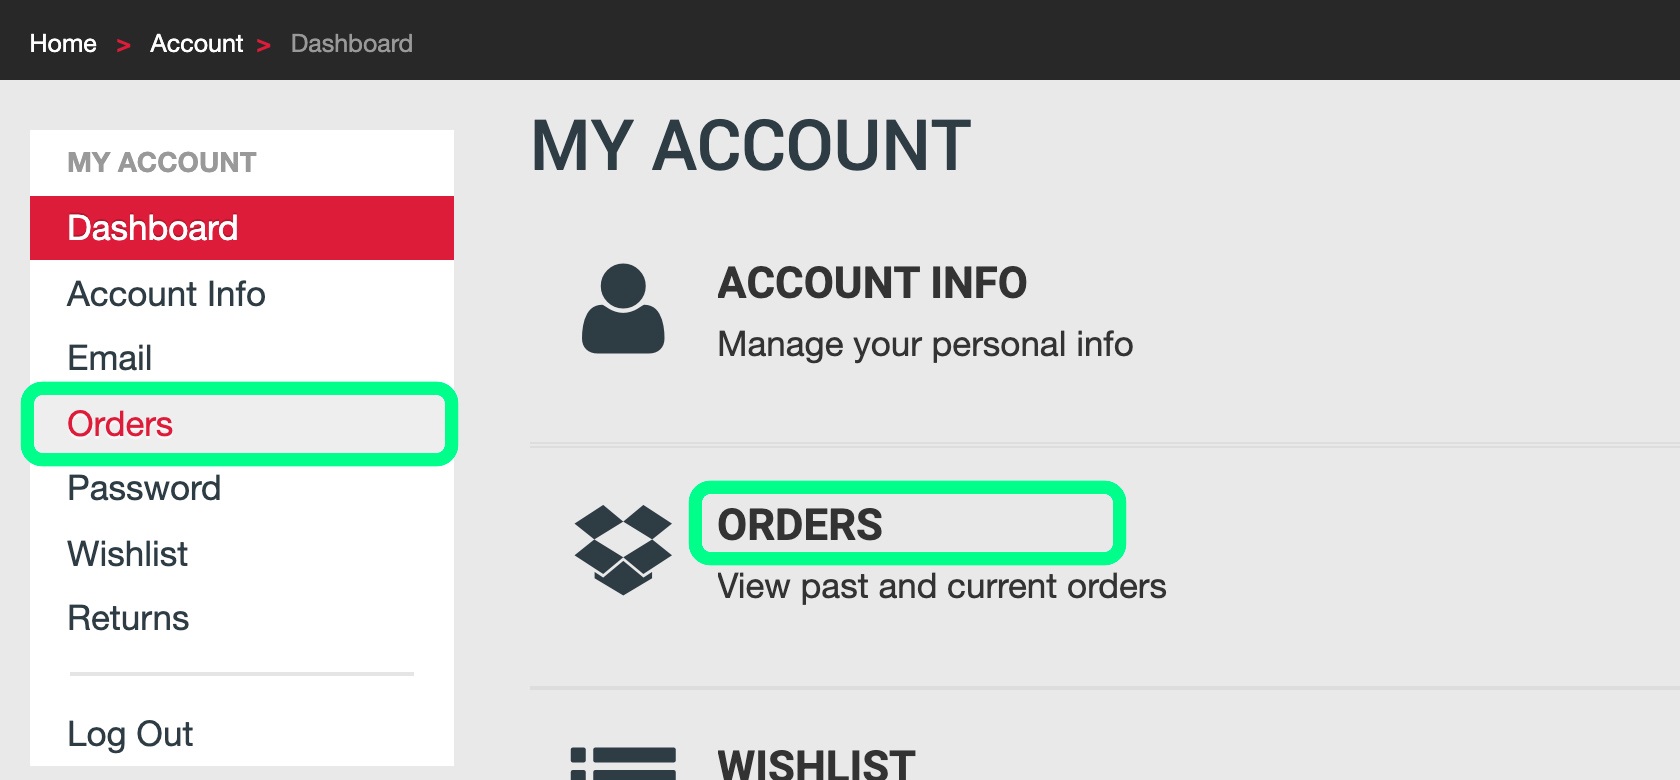 How to Cancel My Order With LMR - step 1